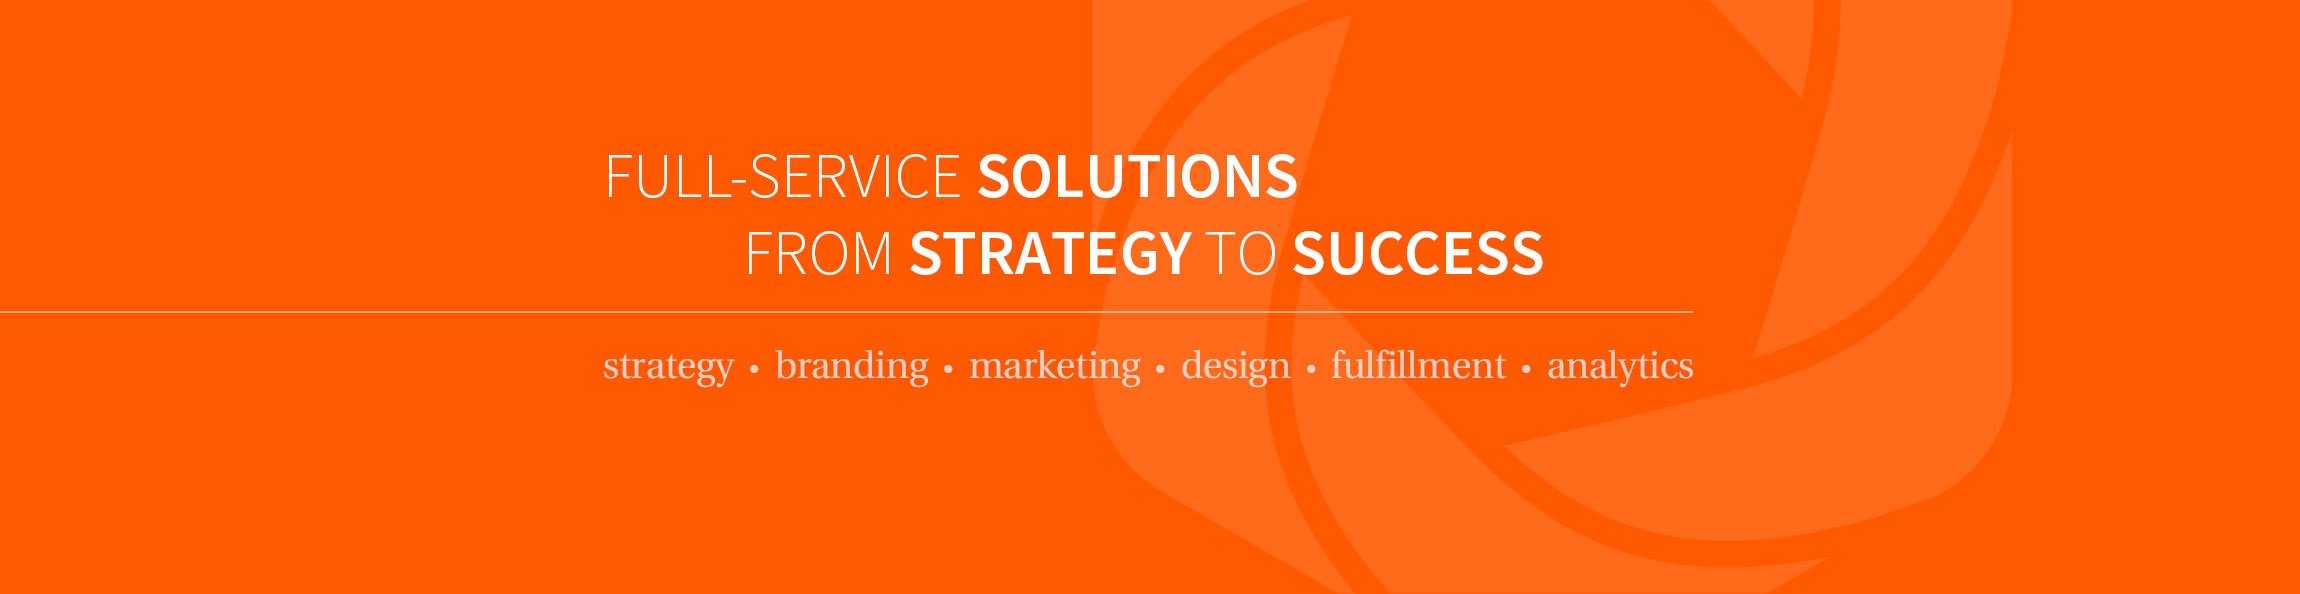 Full-service solutions from strategy to success